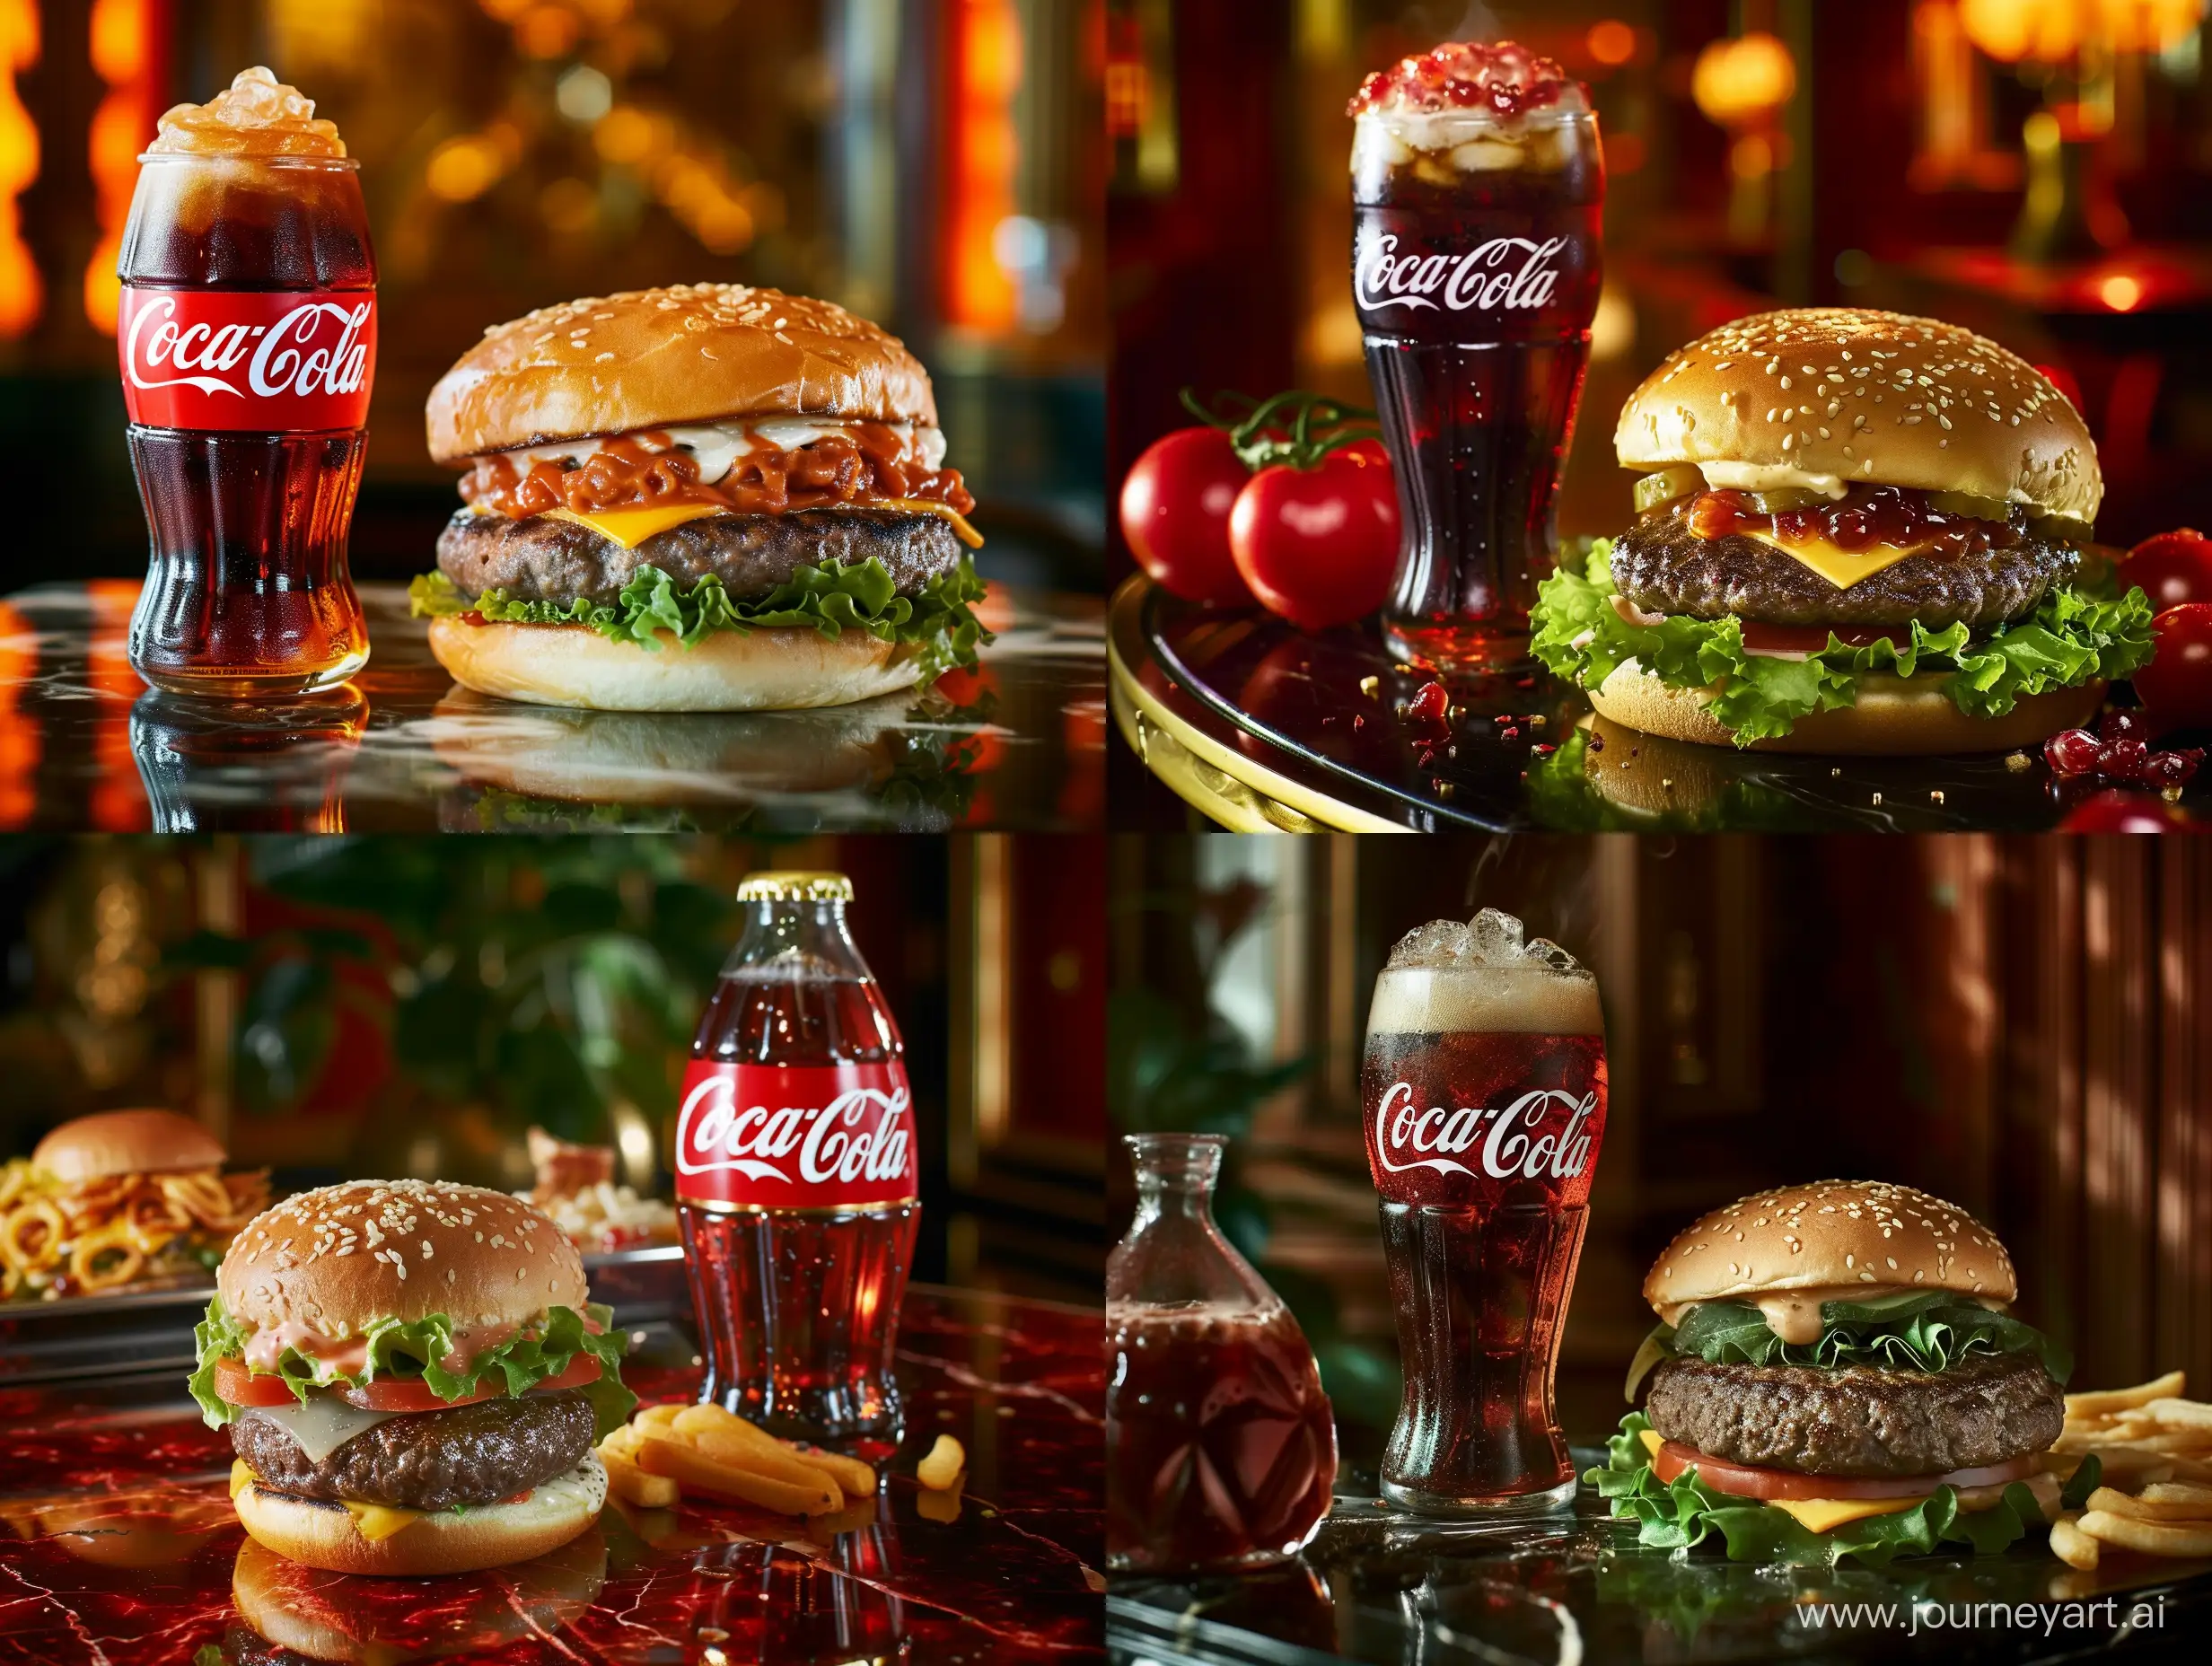 An image to be used on the glass to introduce fast food that uses appetizing colors in this image and shows a hamburger worth 500 dollars and a Coca-Cola on a luxury table, and the hotness of the hamburger and the coolness of the Coca-Cola are clear.